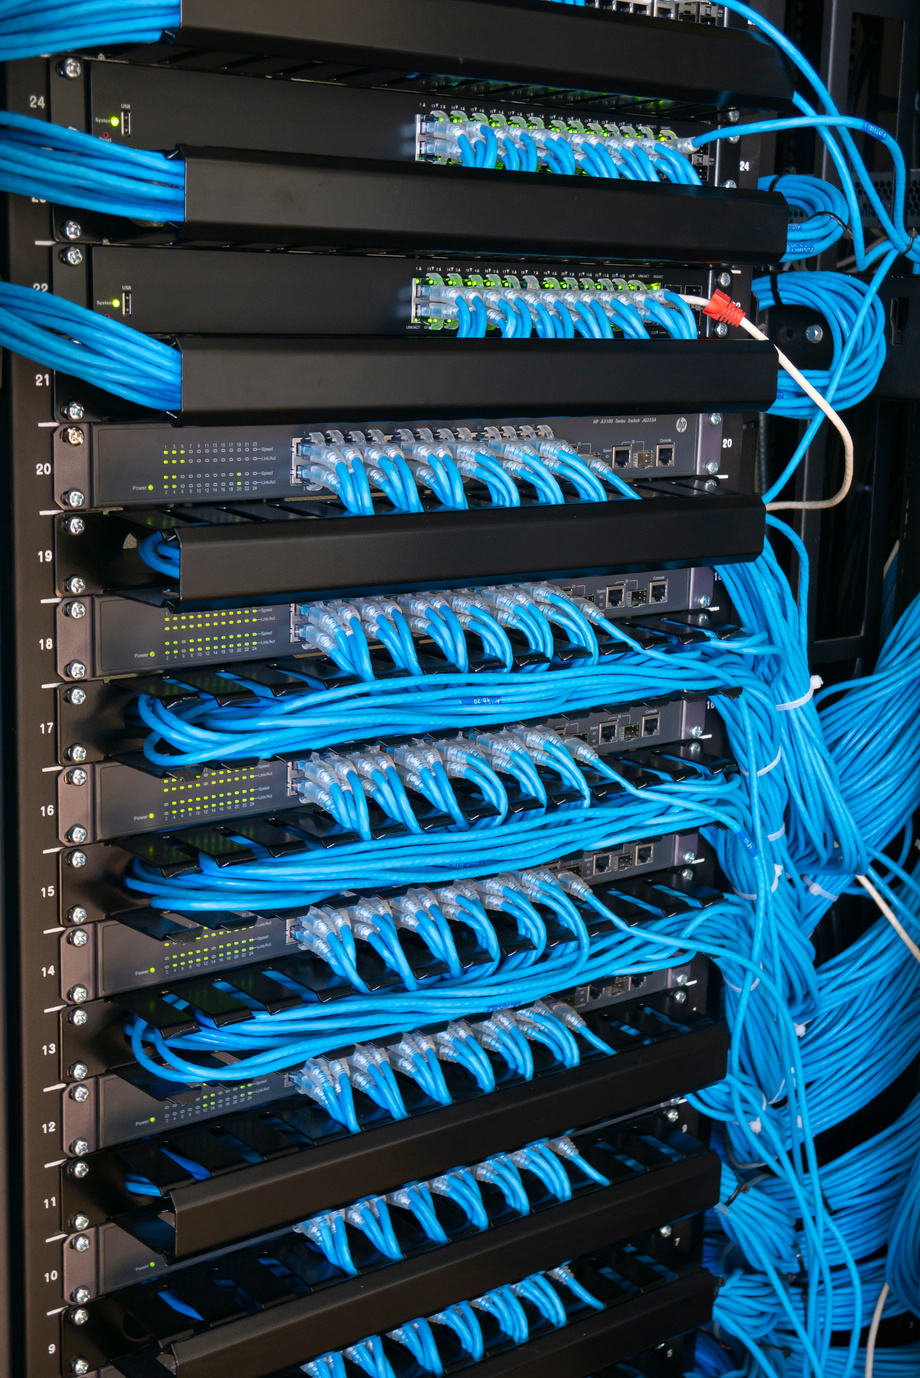 Network switch and ethernet cables in rack cabinet